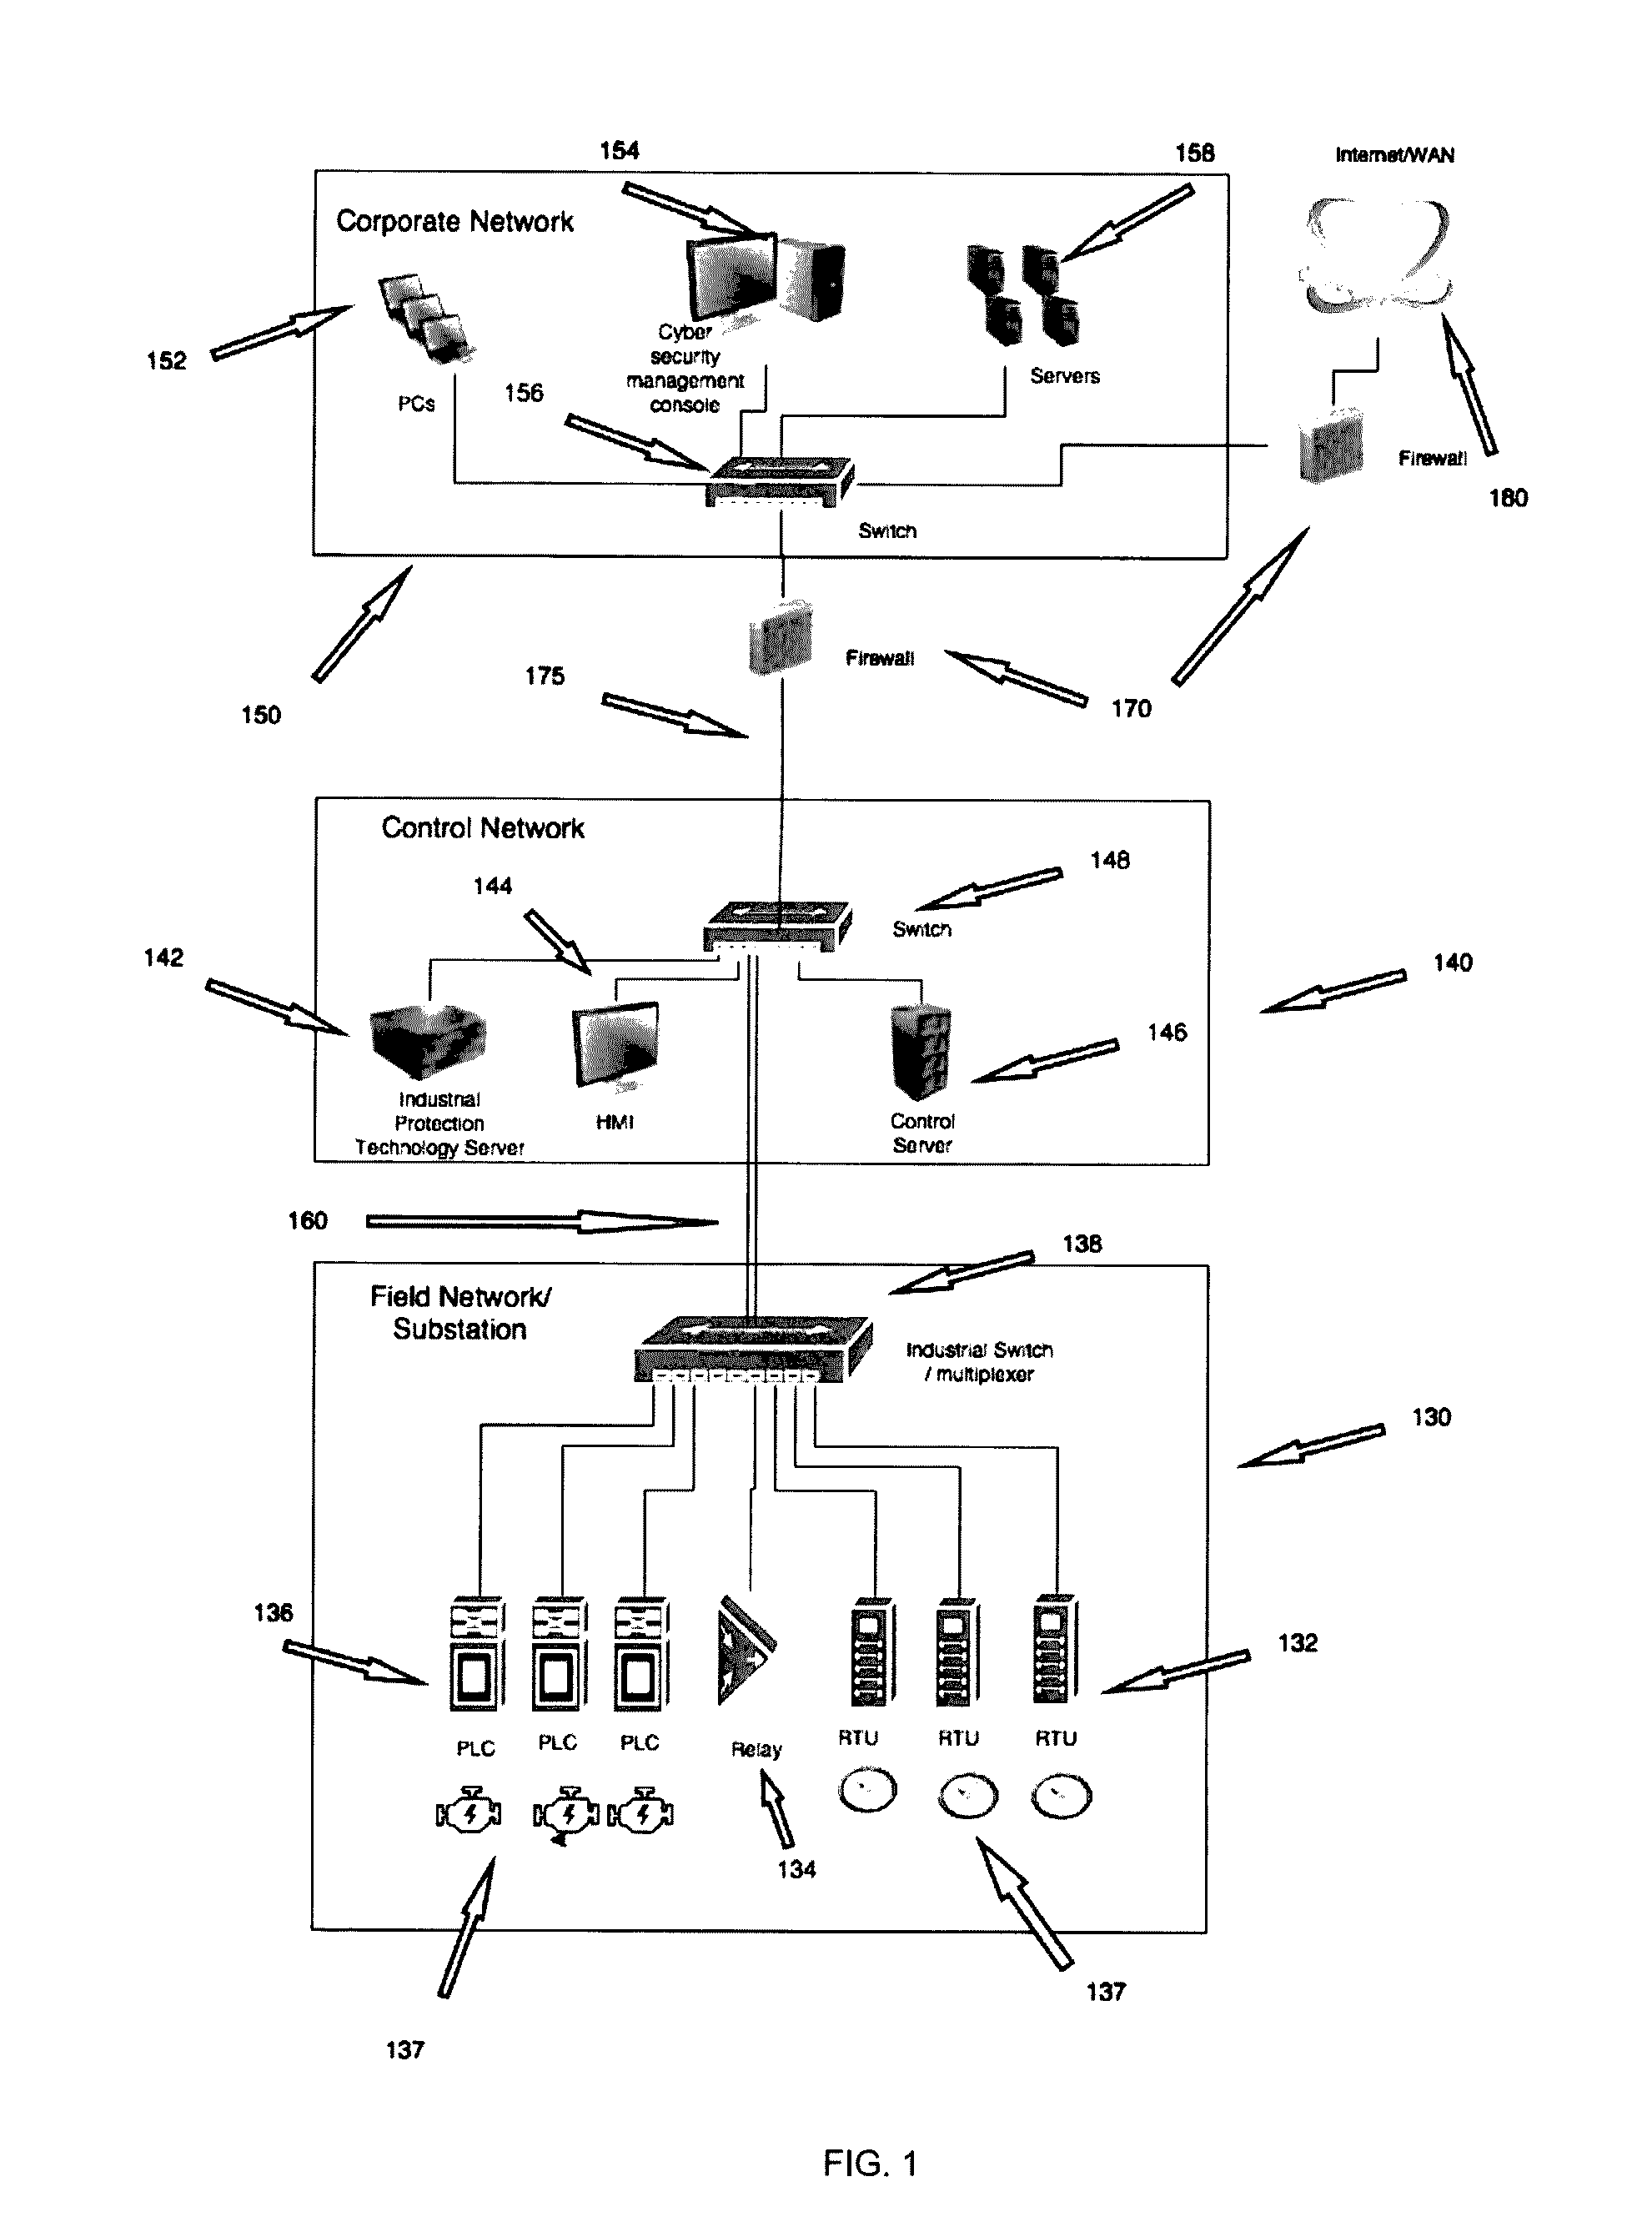 Method for mitigation of cyber attacks on industrial control systems